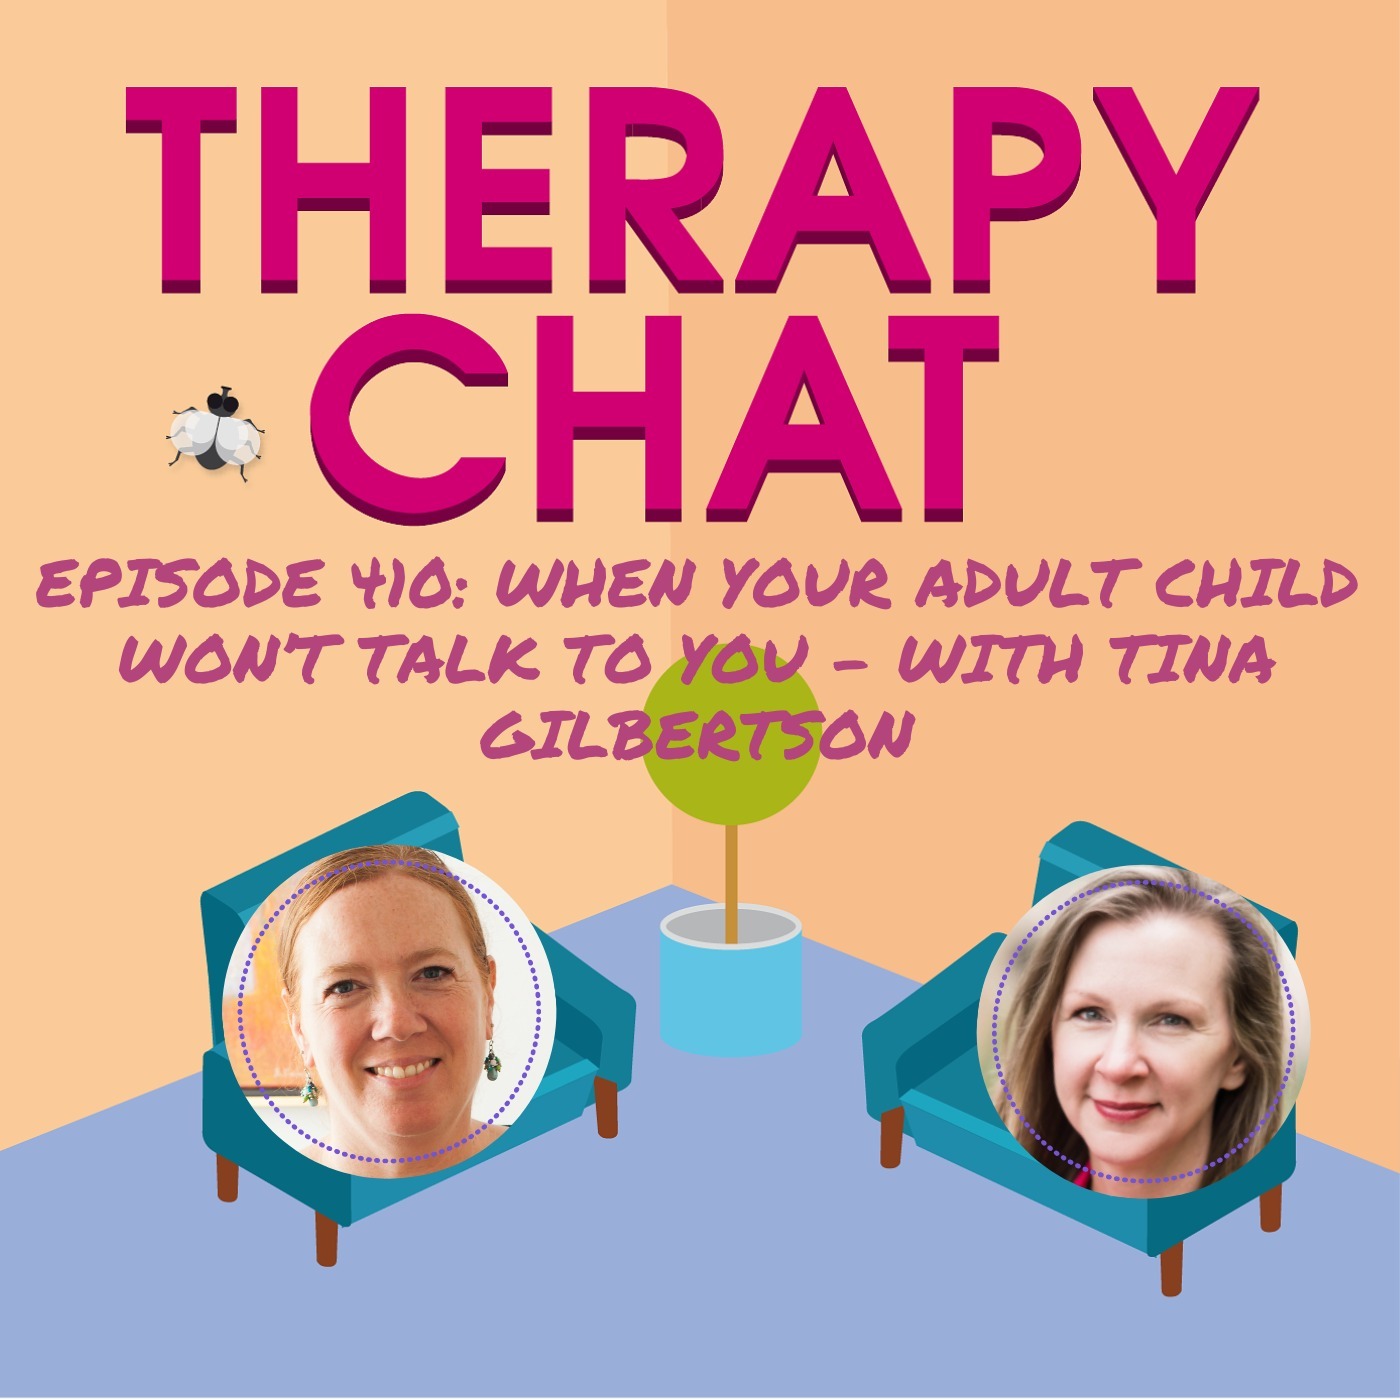 410: When Your Adult Child Won't Talk To You - With Tina Gilbertson